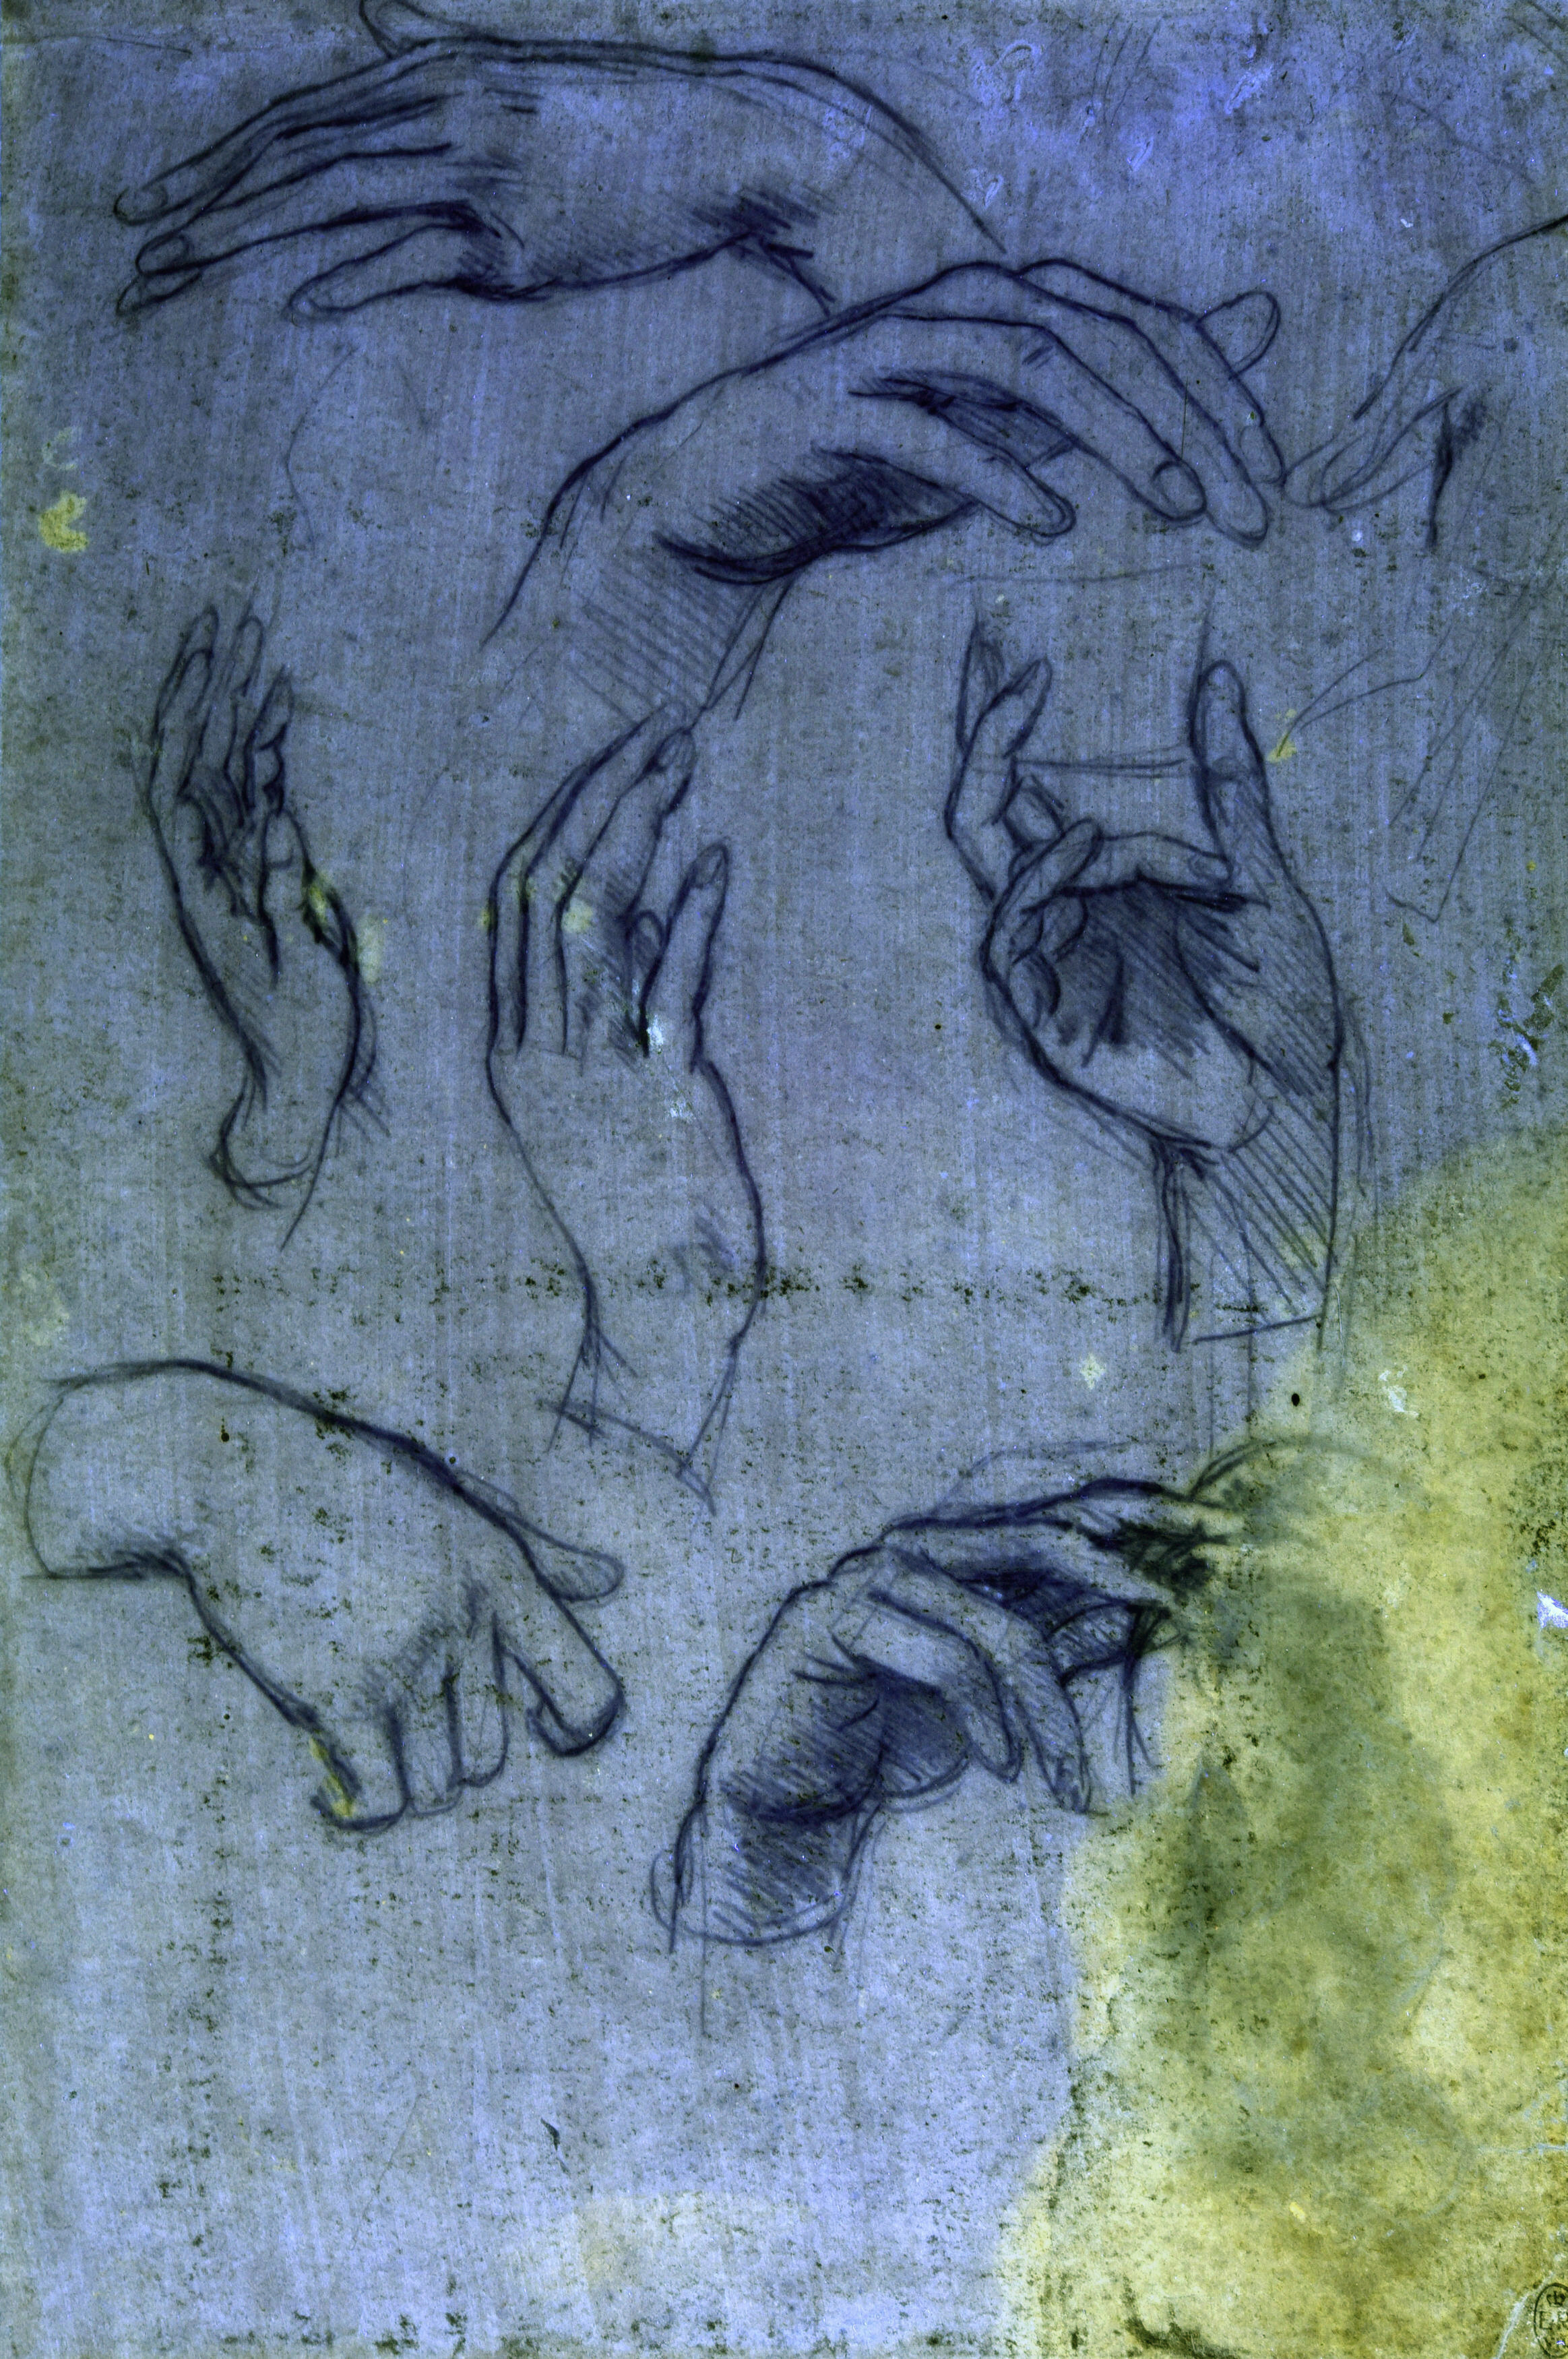 This undated handout provided by The Royal Collection Trust shows studies of hands for the Adoration of the Magi, by Leonardo da Vinci , as seen under ultraviolet light which forms part of the Royal Collection, at Windsor Castle in Windsor, England. The newly identified sketch will go on public display for the first time later this month in Leonardo da Vinci: A Life in Drawing at The Queen's Gallery, Buckingham Palace in London between May 24 - Oct. 13, 2019. (The Royal Collection Trust via AP)